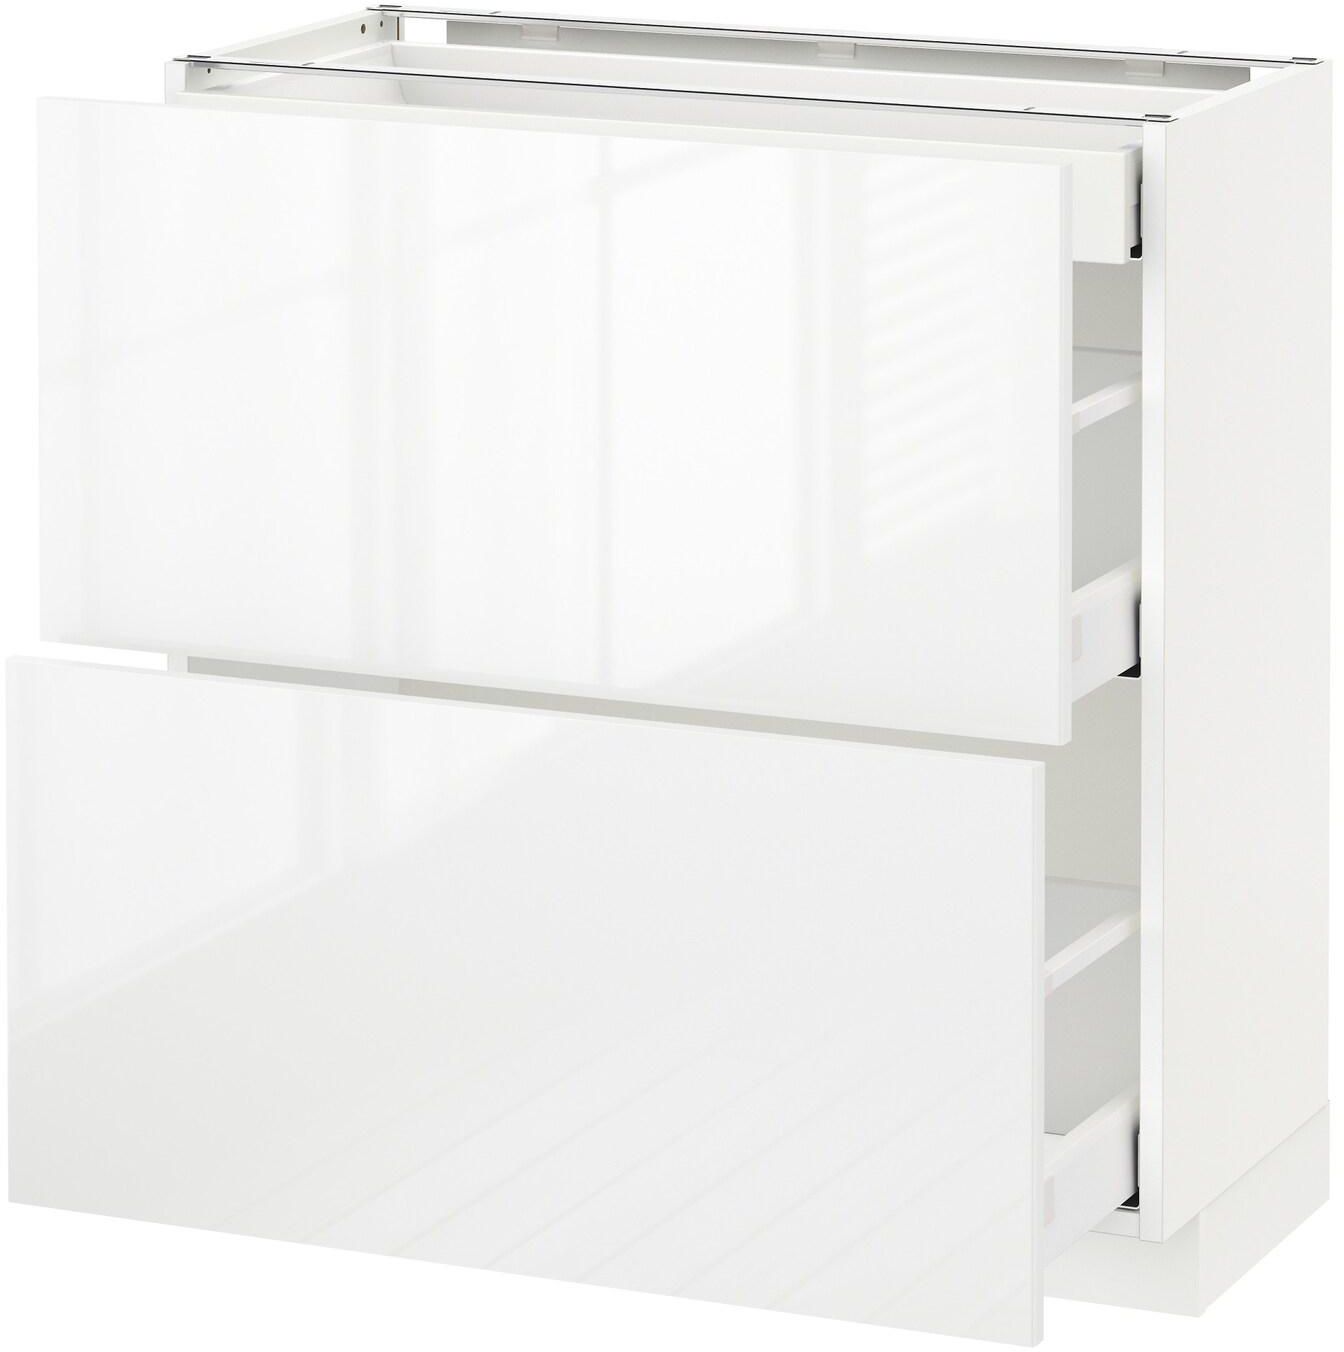 METOD / MAXIMERA Base cab with 2 fronts/3 drawers - white/Ringhult white 80x37 cm